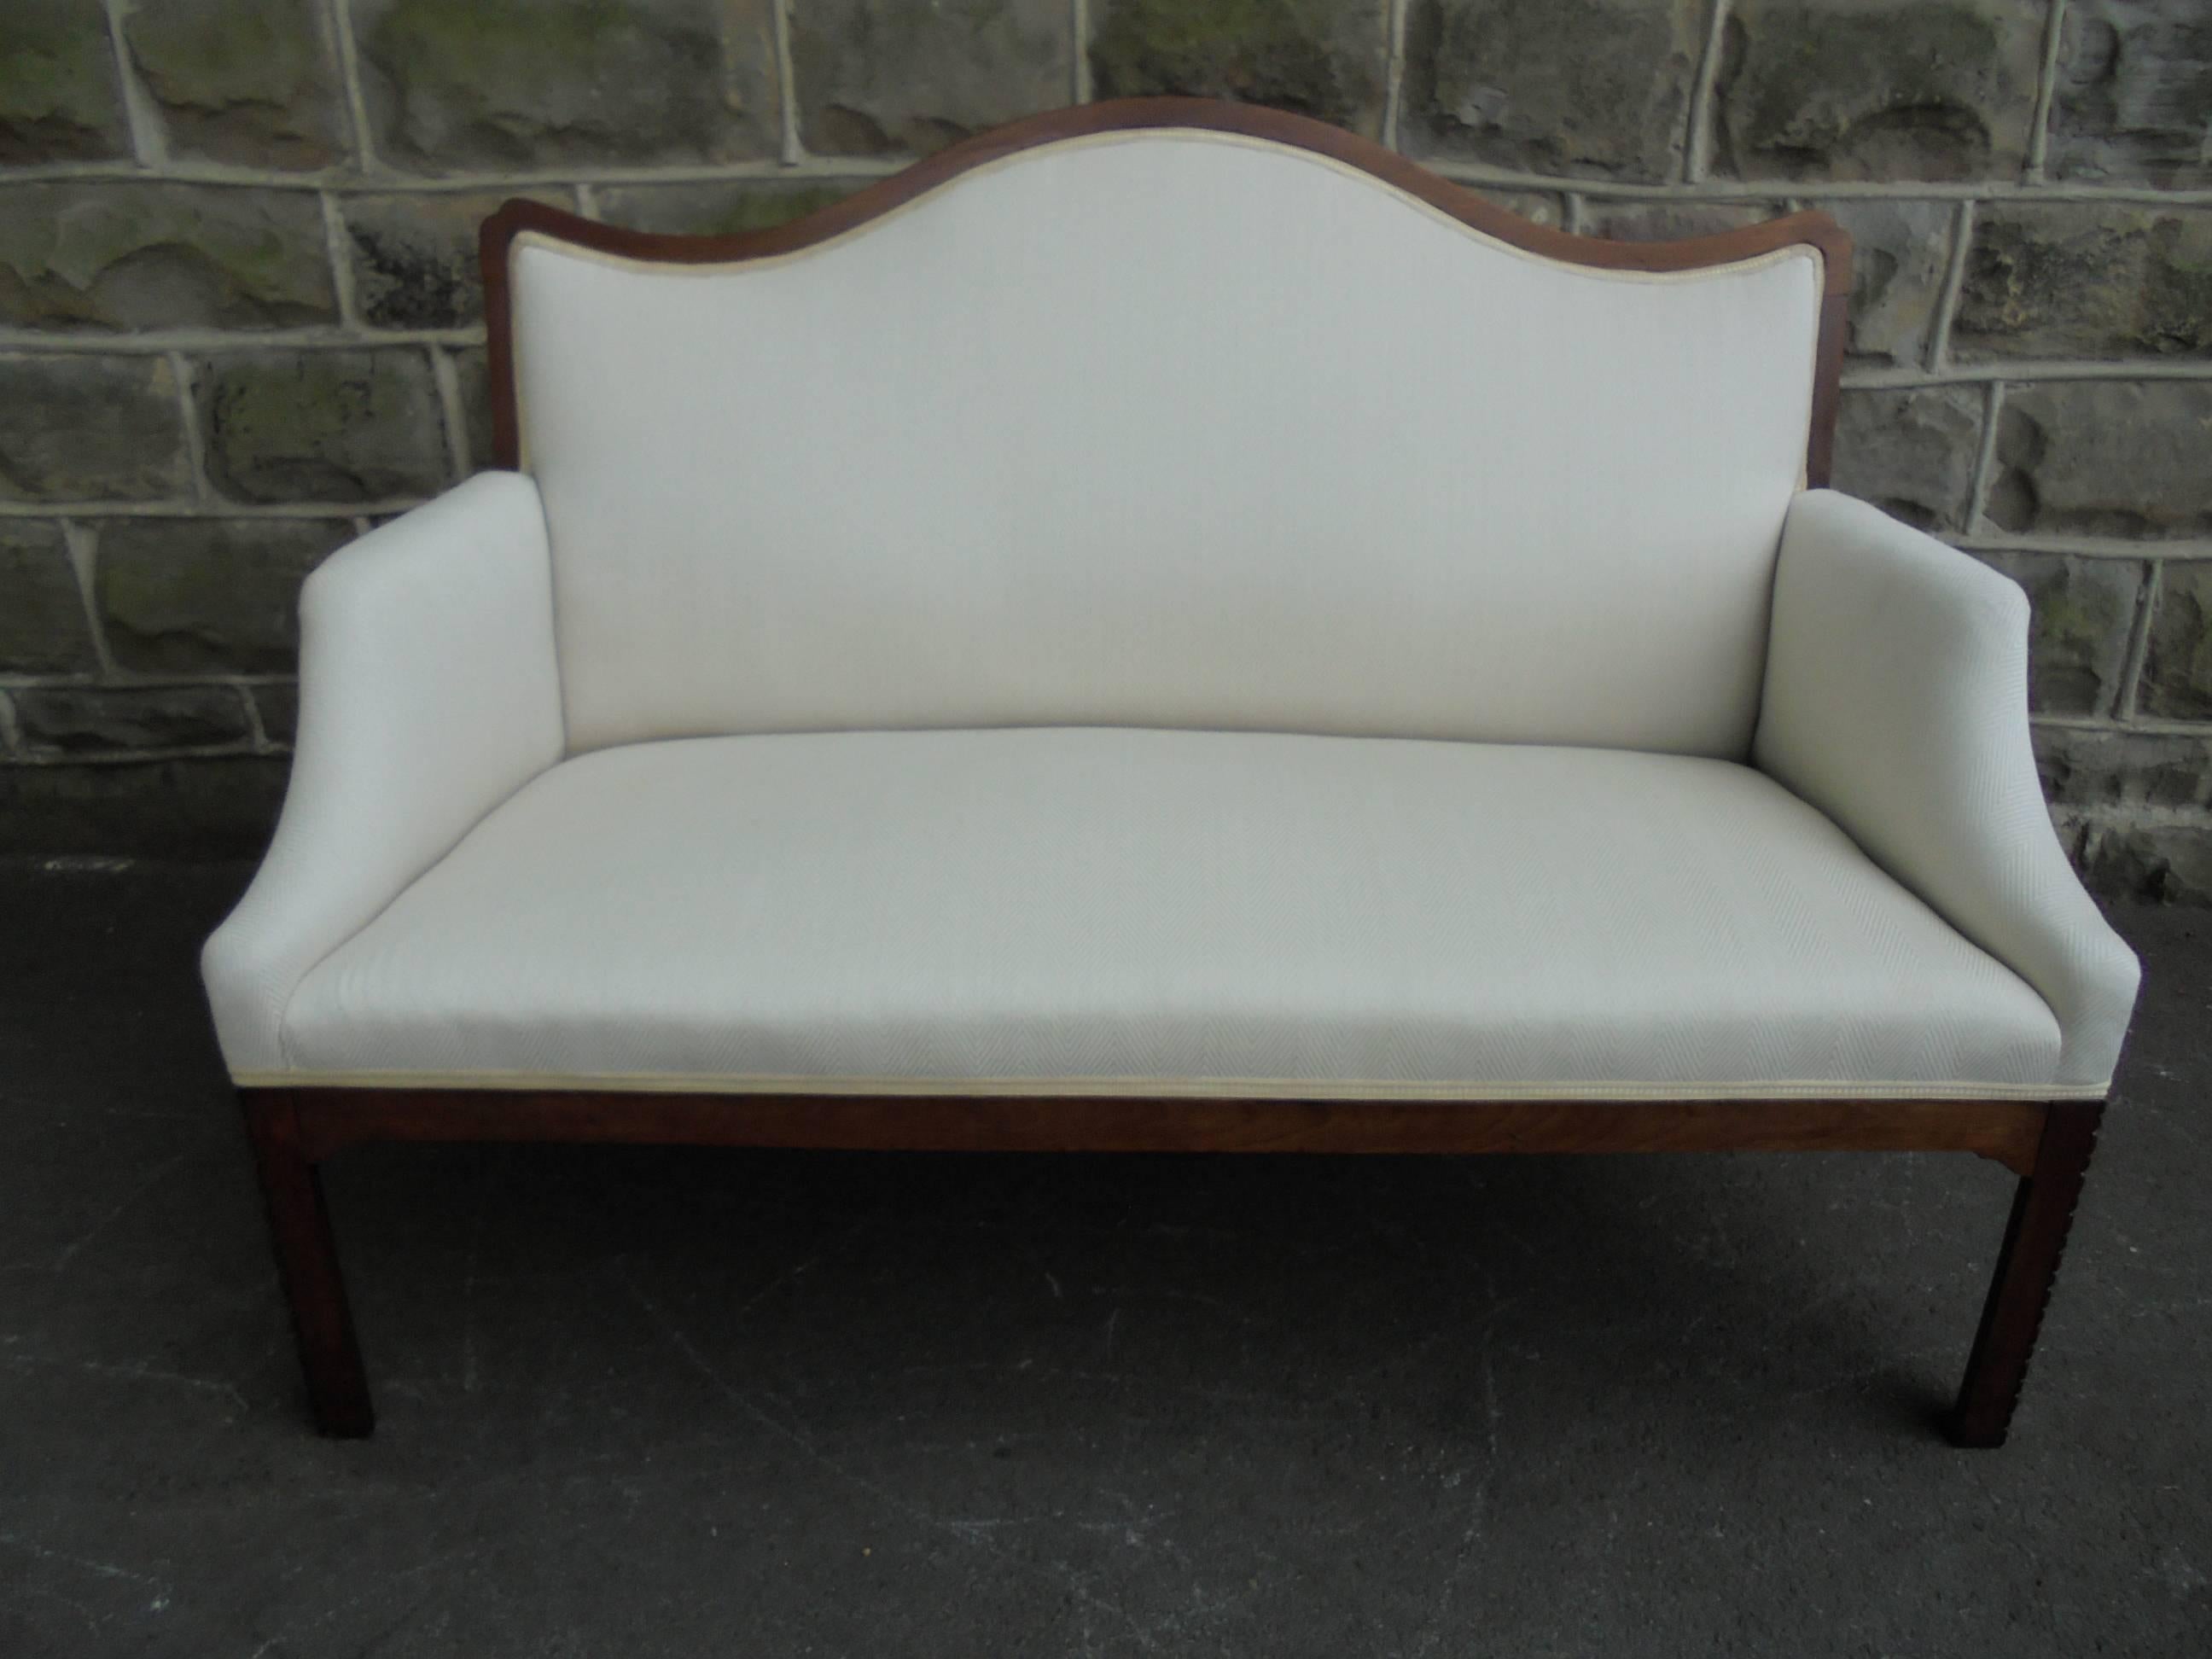 Offered for sale is this nice sized antique English upholstered sofa.

Dating from 1900. Mahogany frame having a shaped top rail, standing on square chamfered legs with carved decoration. Splayed legs to the back with castors (front legs have